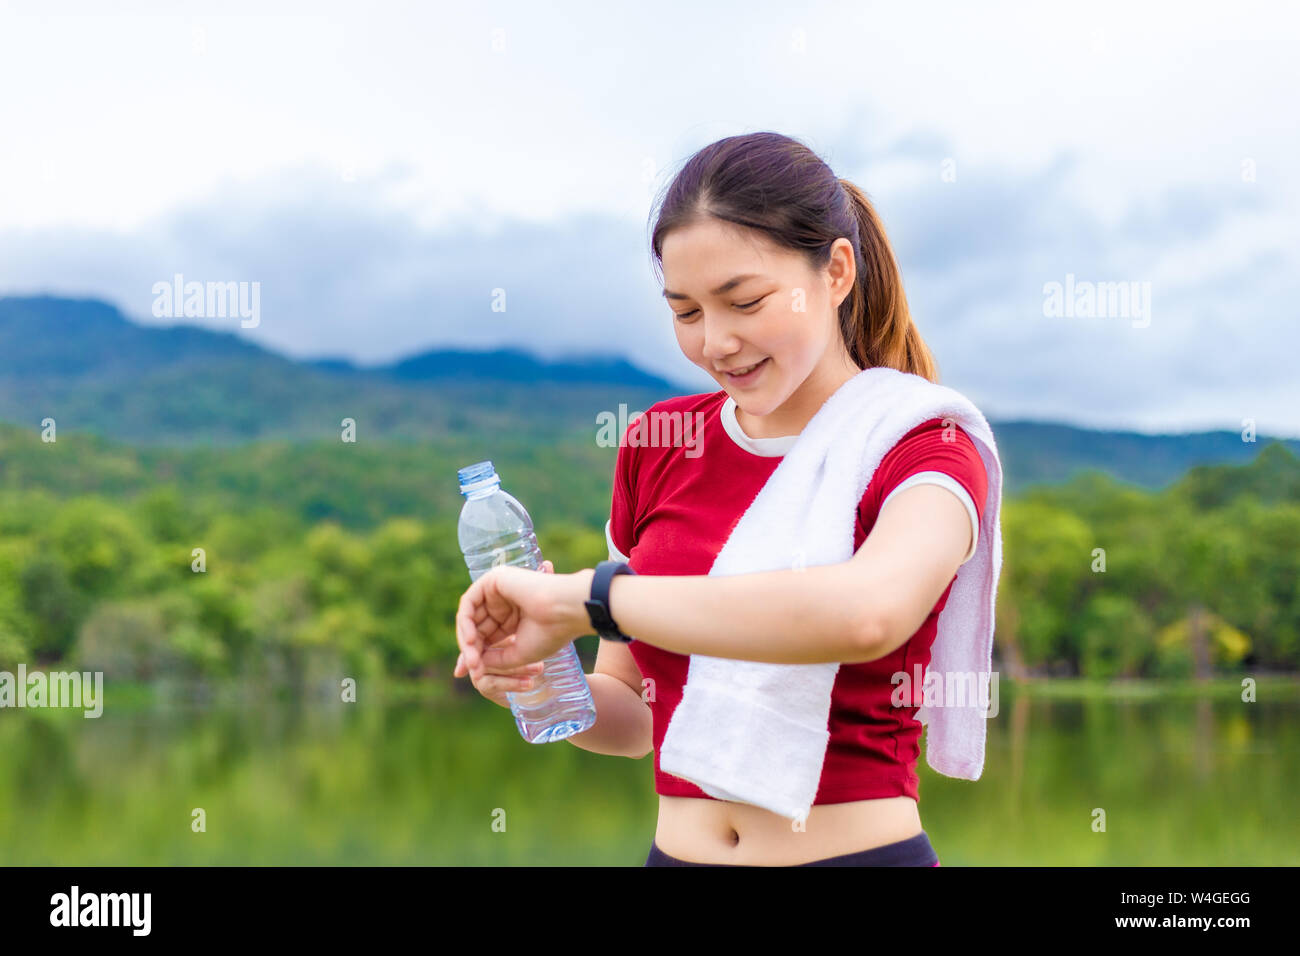 Young happy athlete woman holding a bottle of water and looking at her smart watch to check her exercise progress after her morning routine at a lake Stock Photo